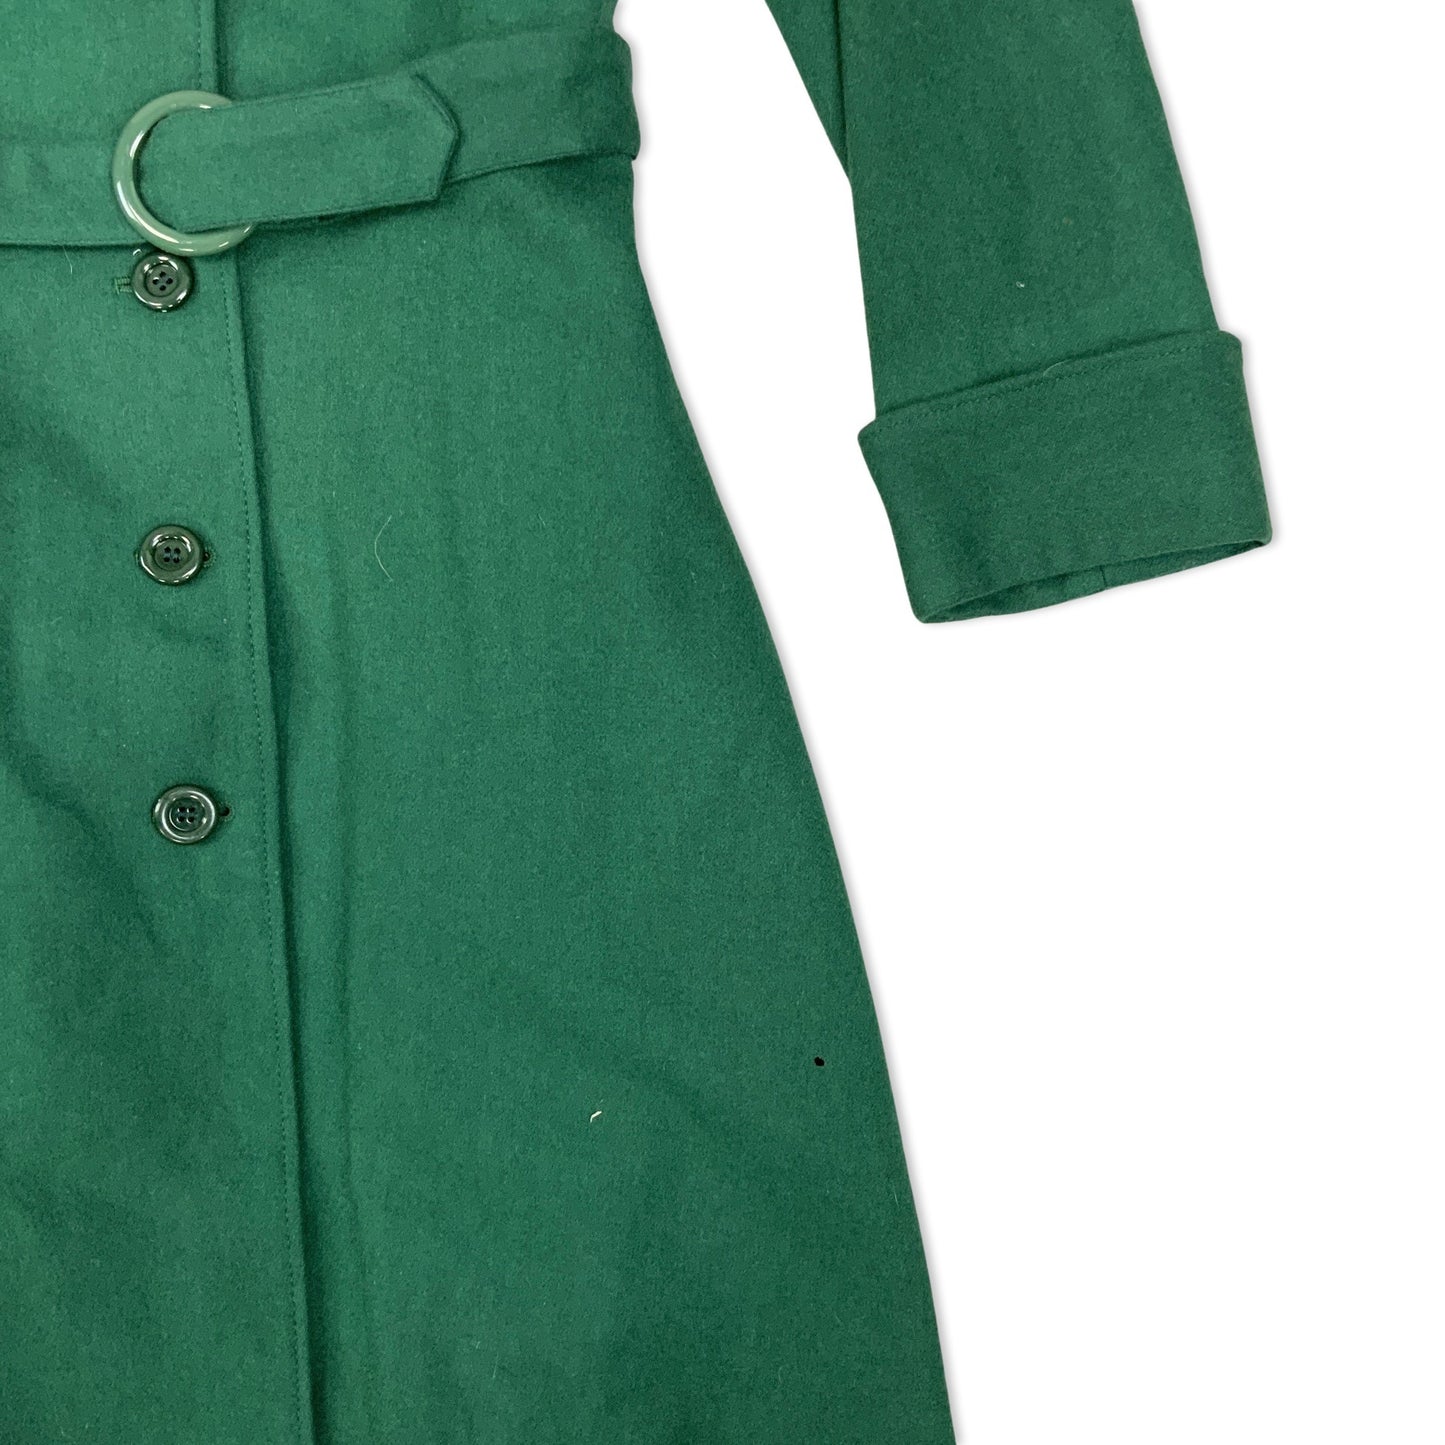 Vintage Green Wool Trench Coat 10 12